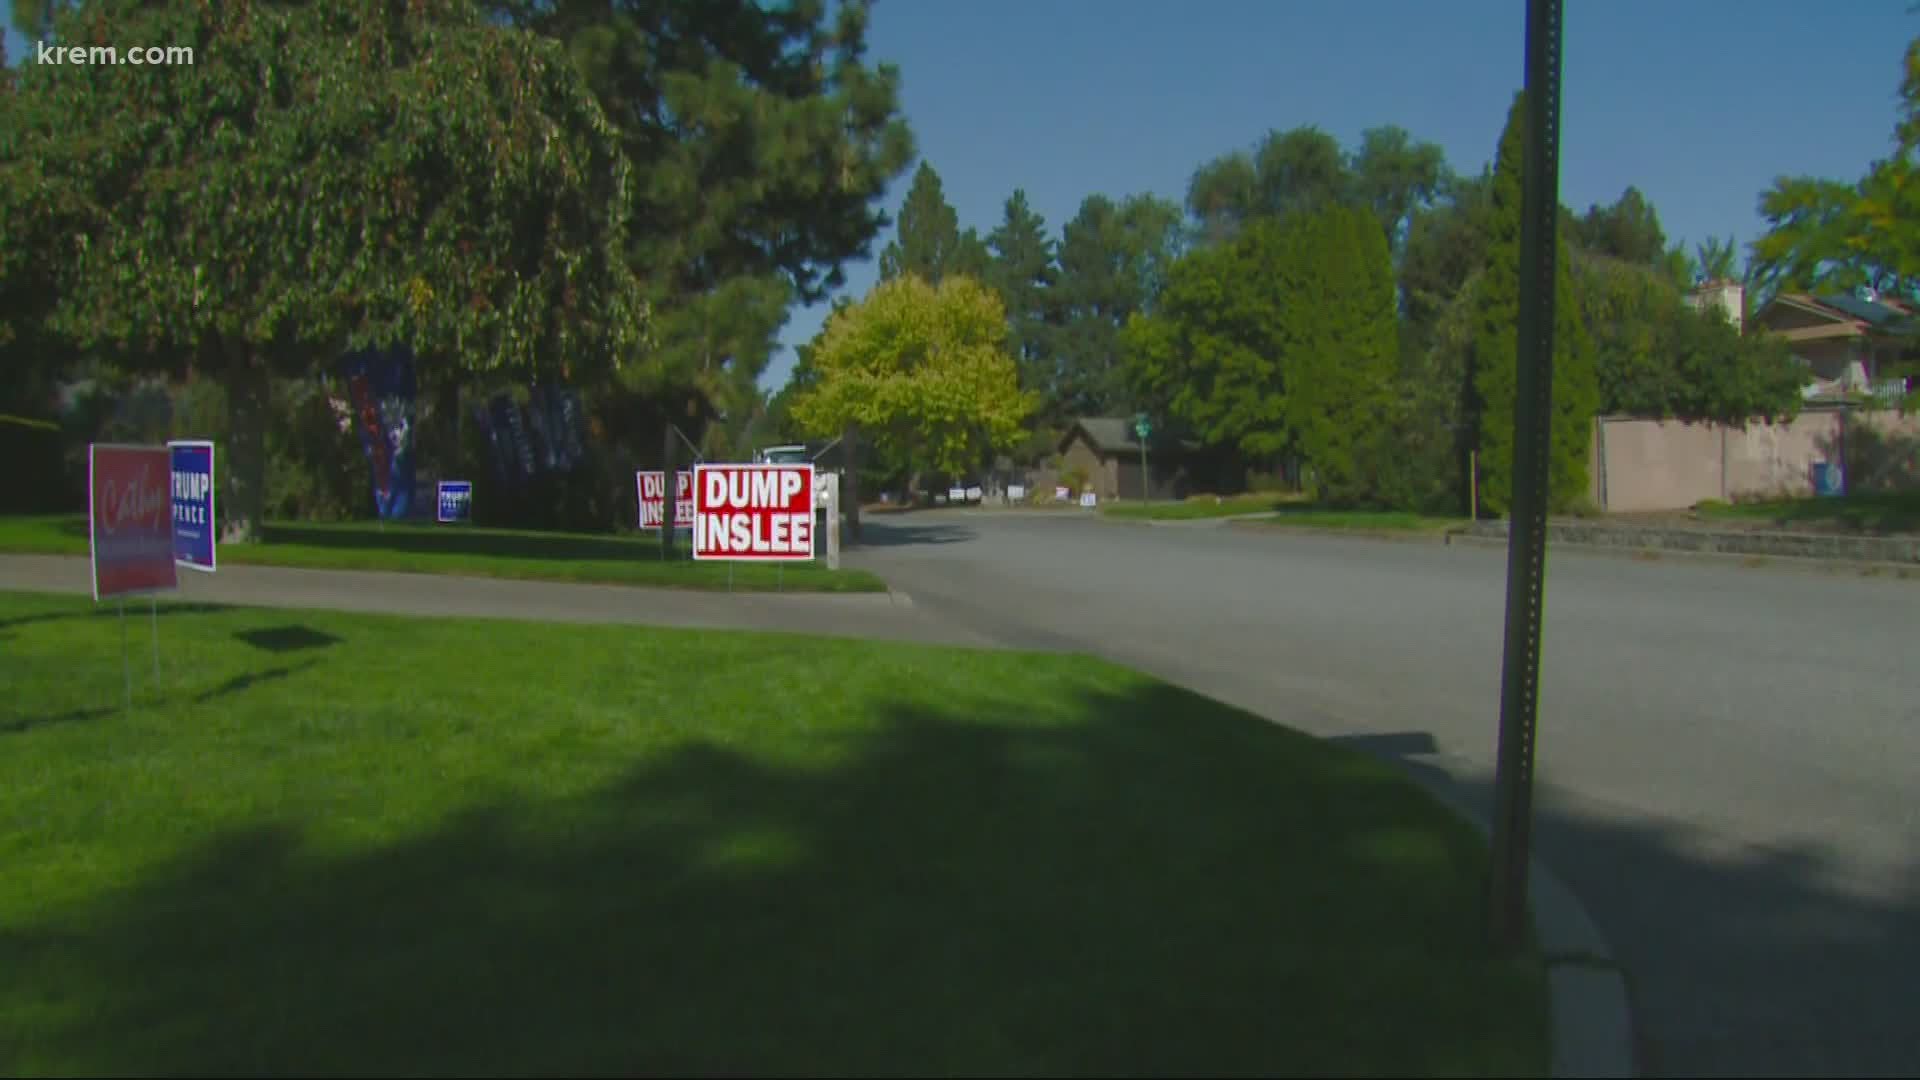 Some local law enforcement agencies have received reports of political signs supporting both political parties either being stolen or vandalized on private property.